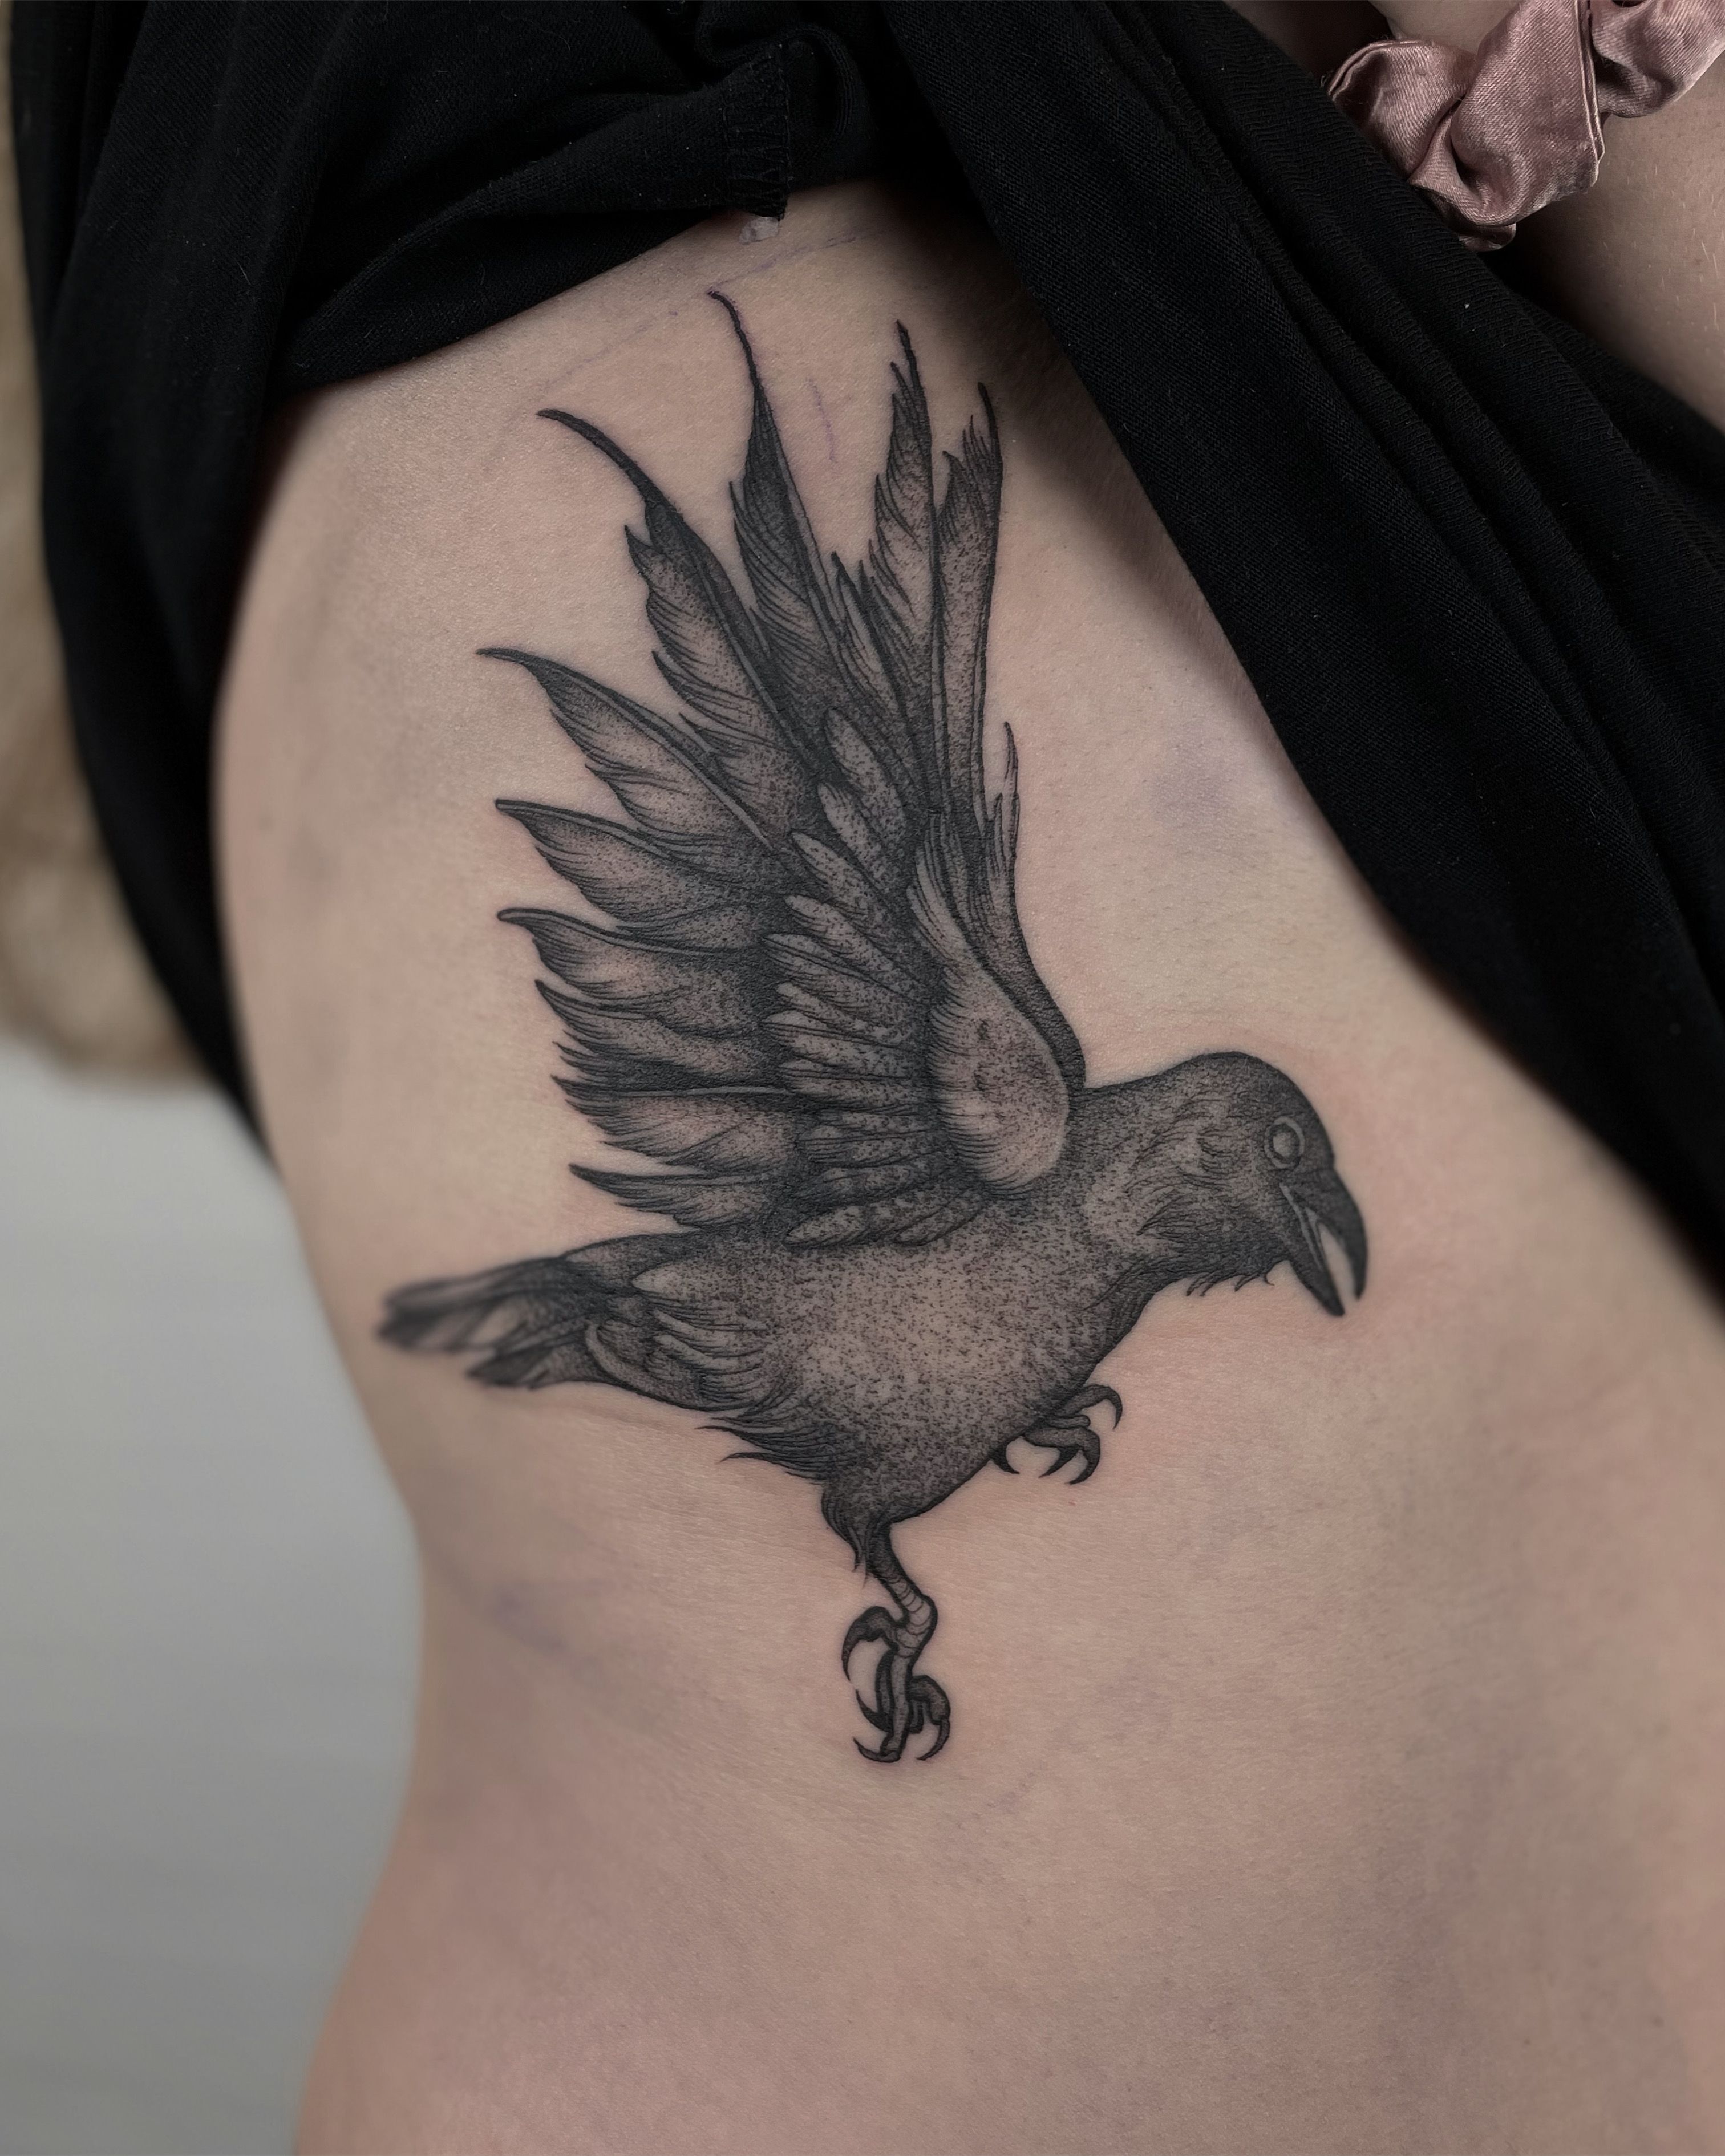 Crow skull for Ethan, one of two done that day! Thank you for sitting so  well. I hope it settled in nice easy and quick. ⋆ Studio XIII Gallery